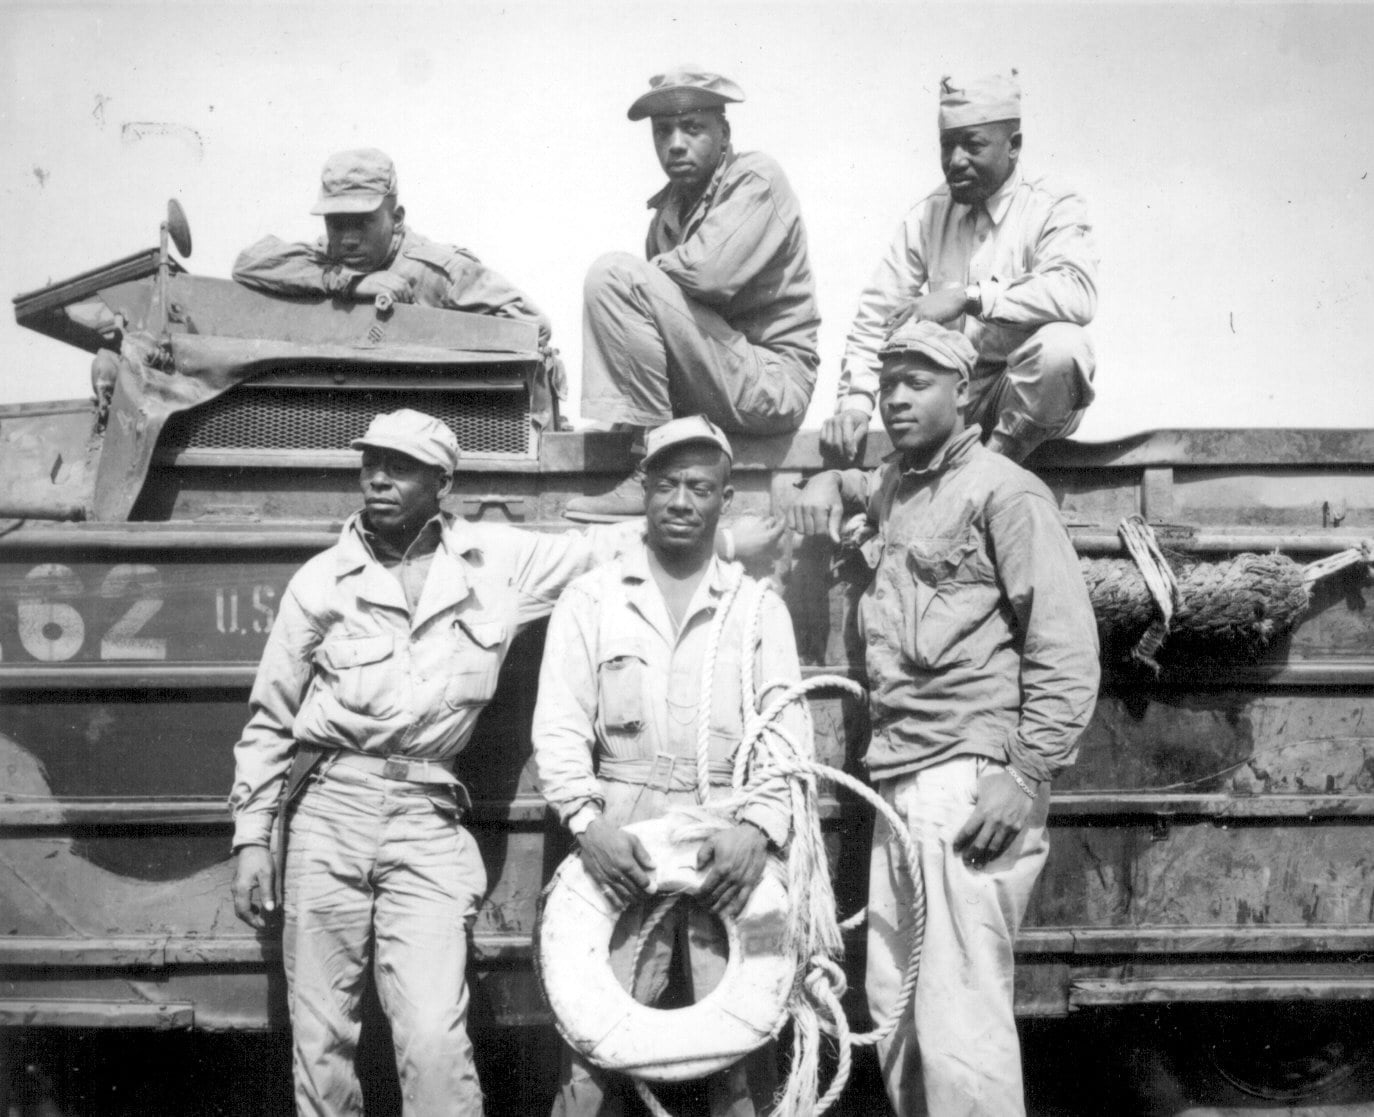 Six African American soldiers pose in front of a WWII DUKW